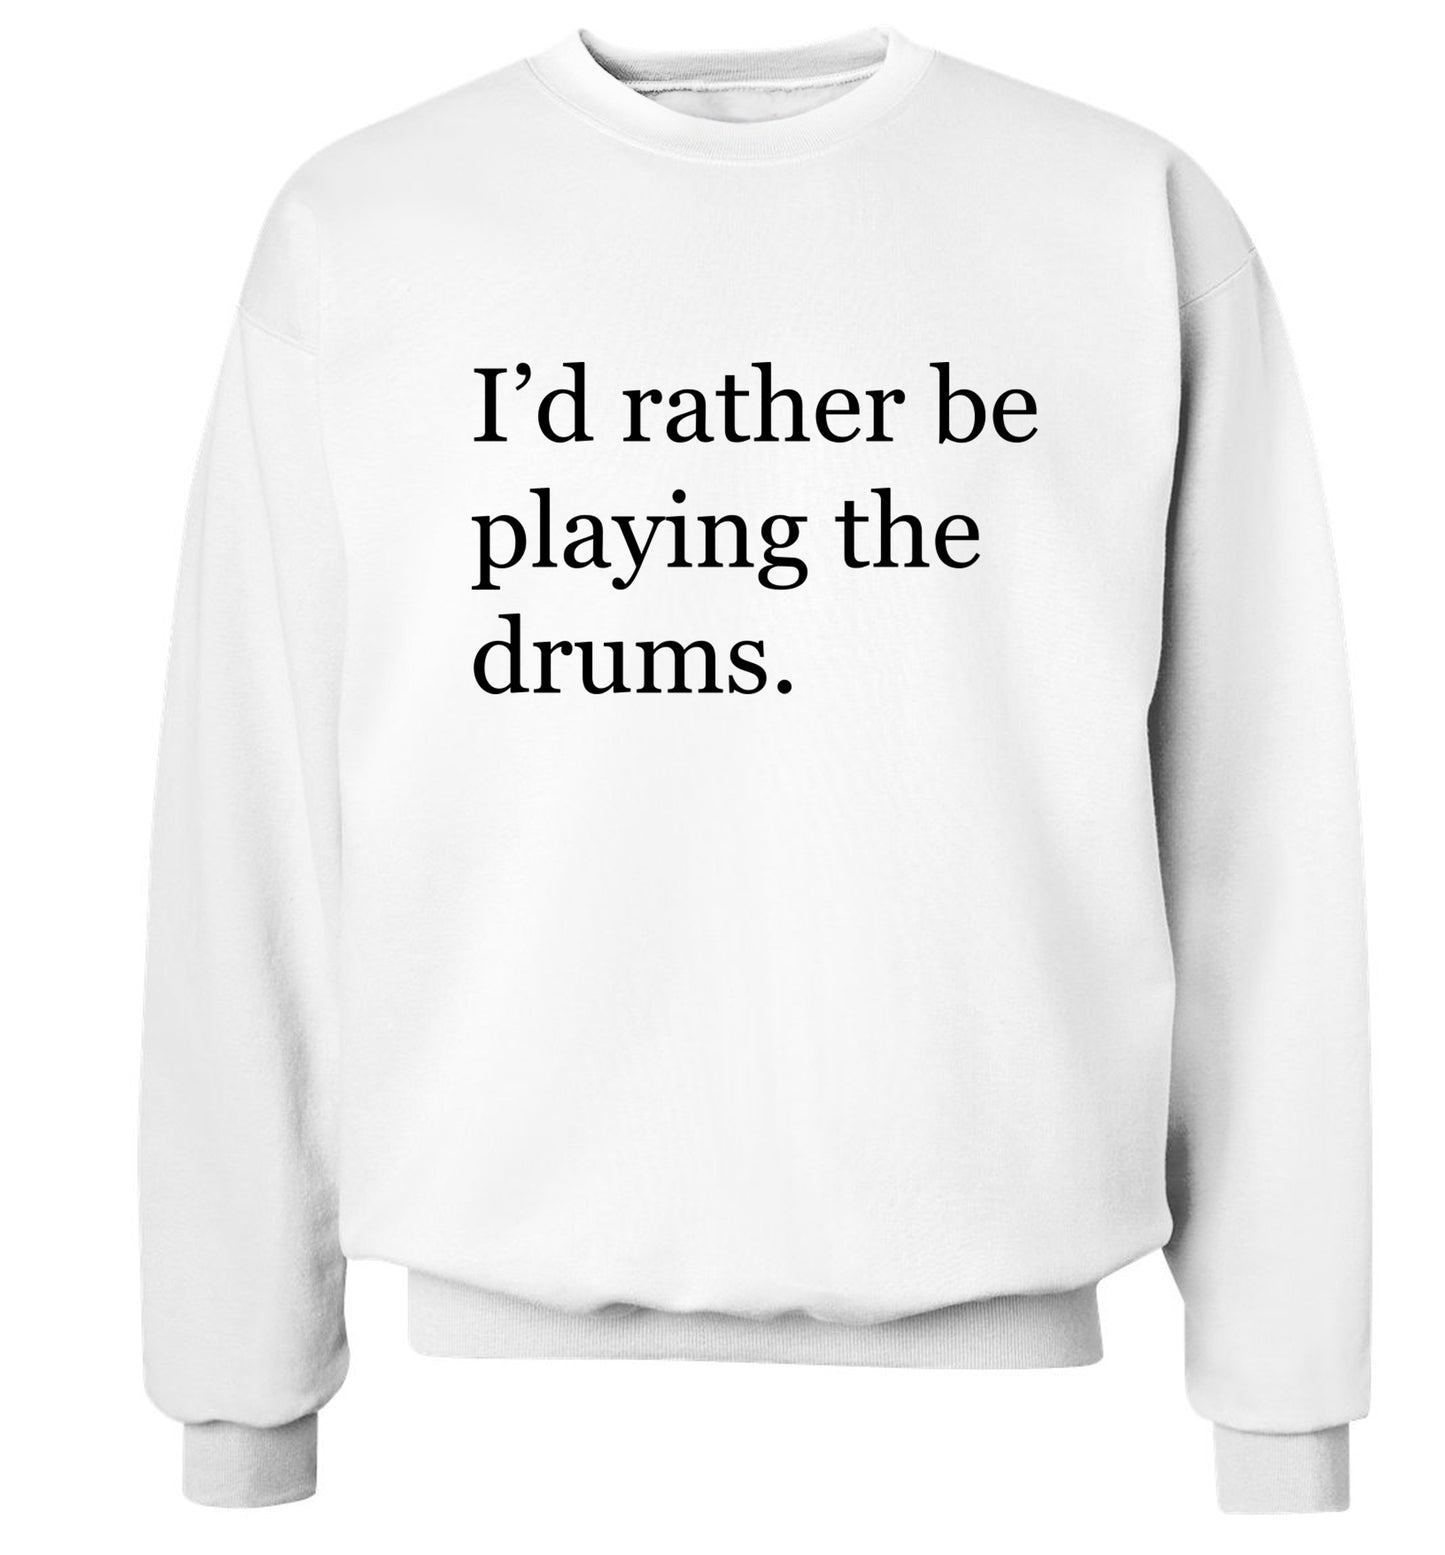 I'd rather be playing the drums Adult's unisexwhite Sweater 2XL